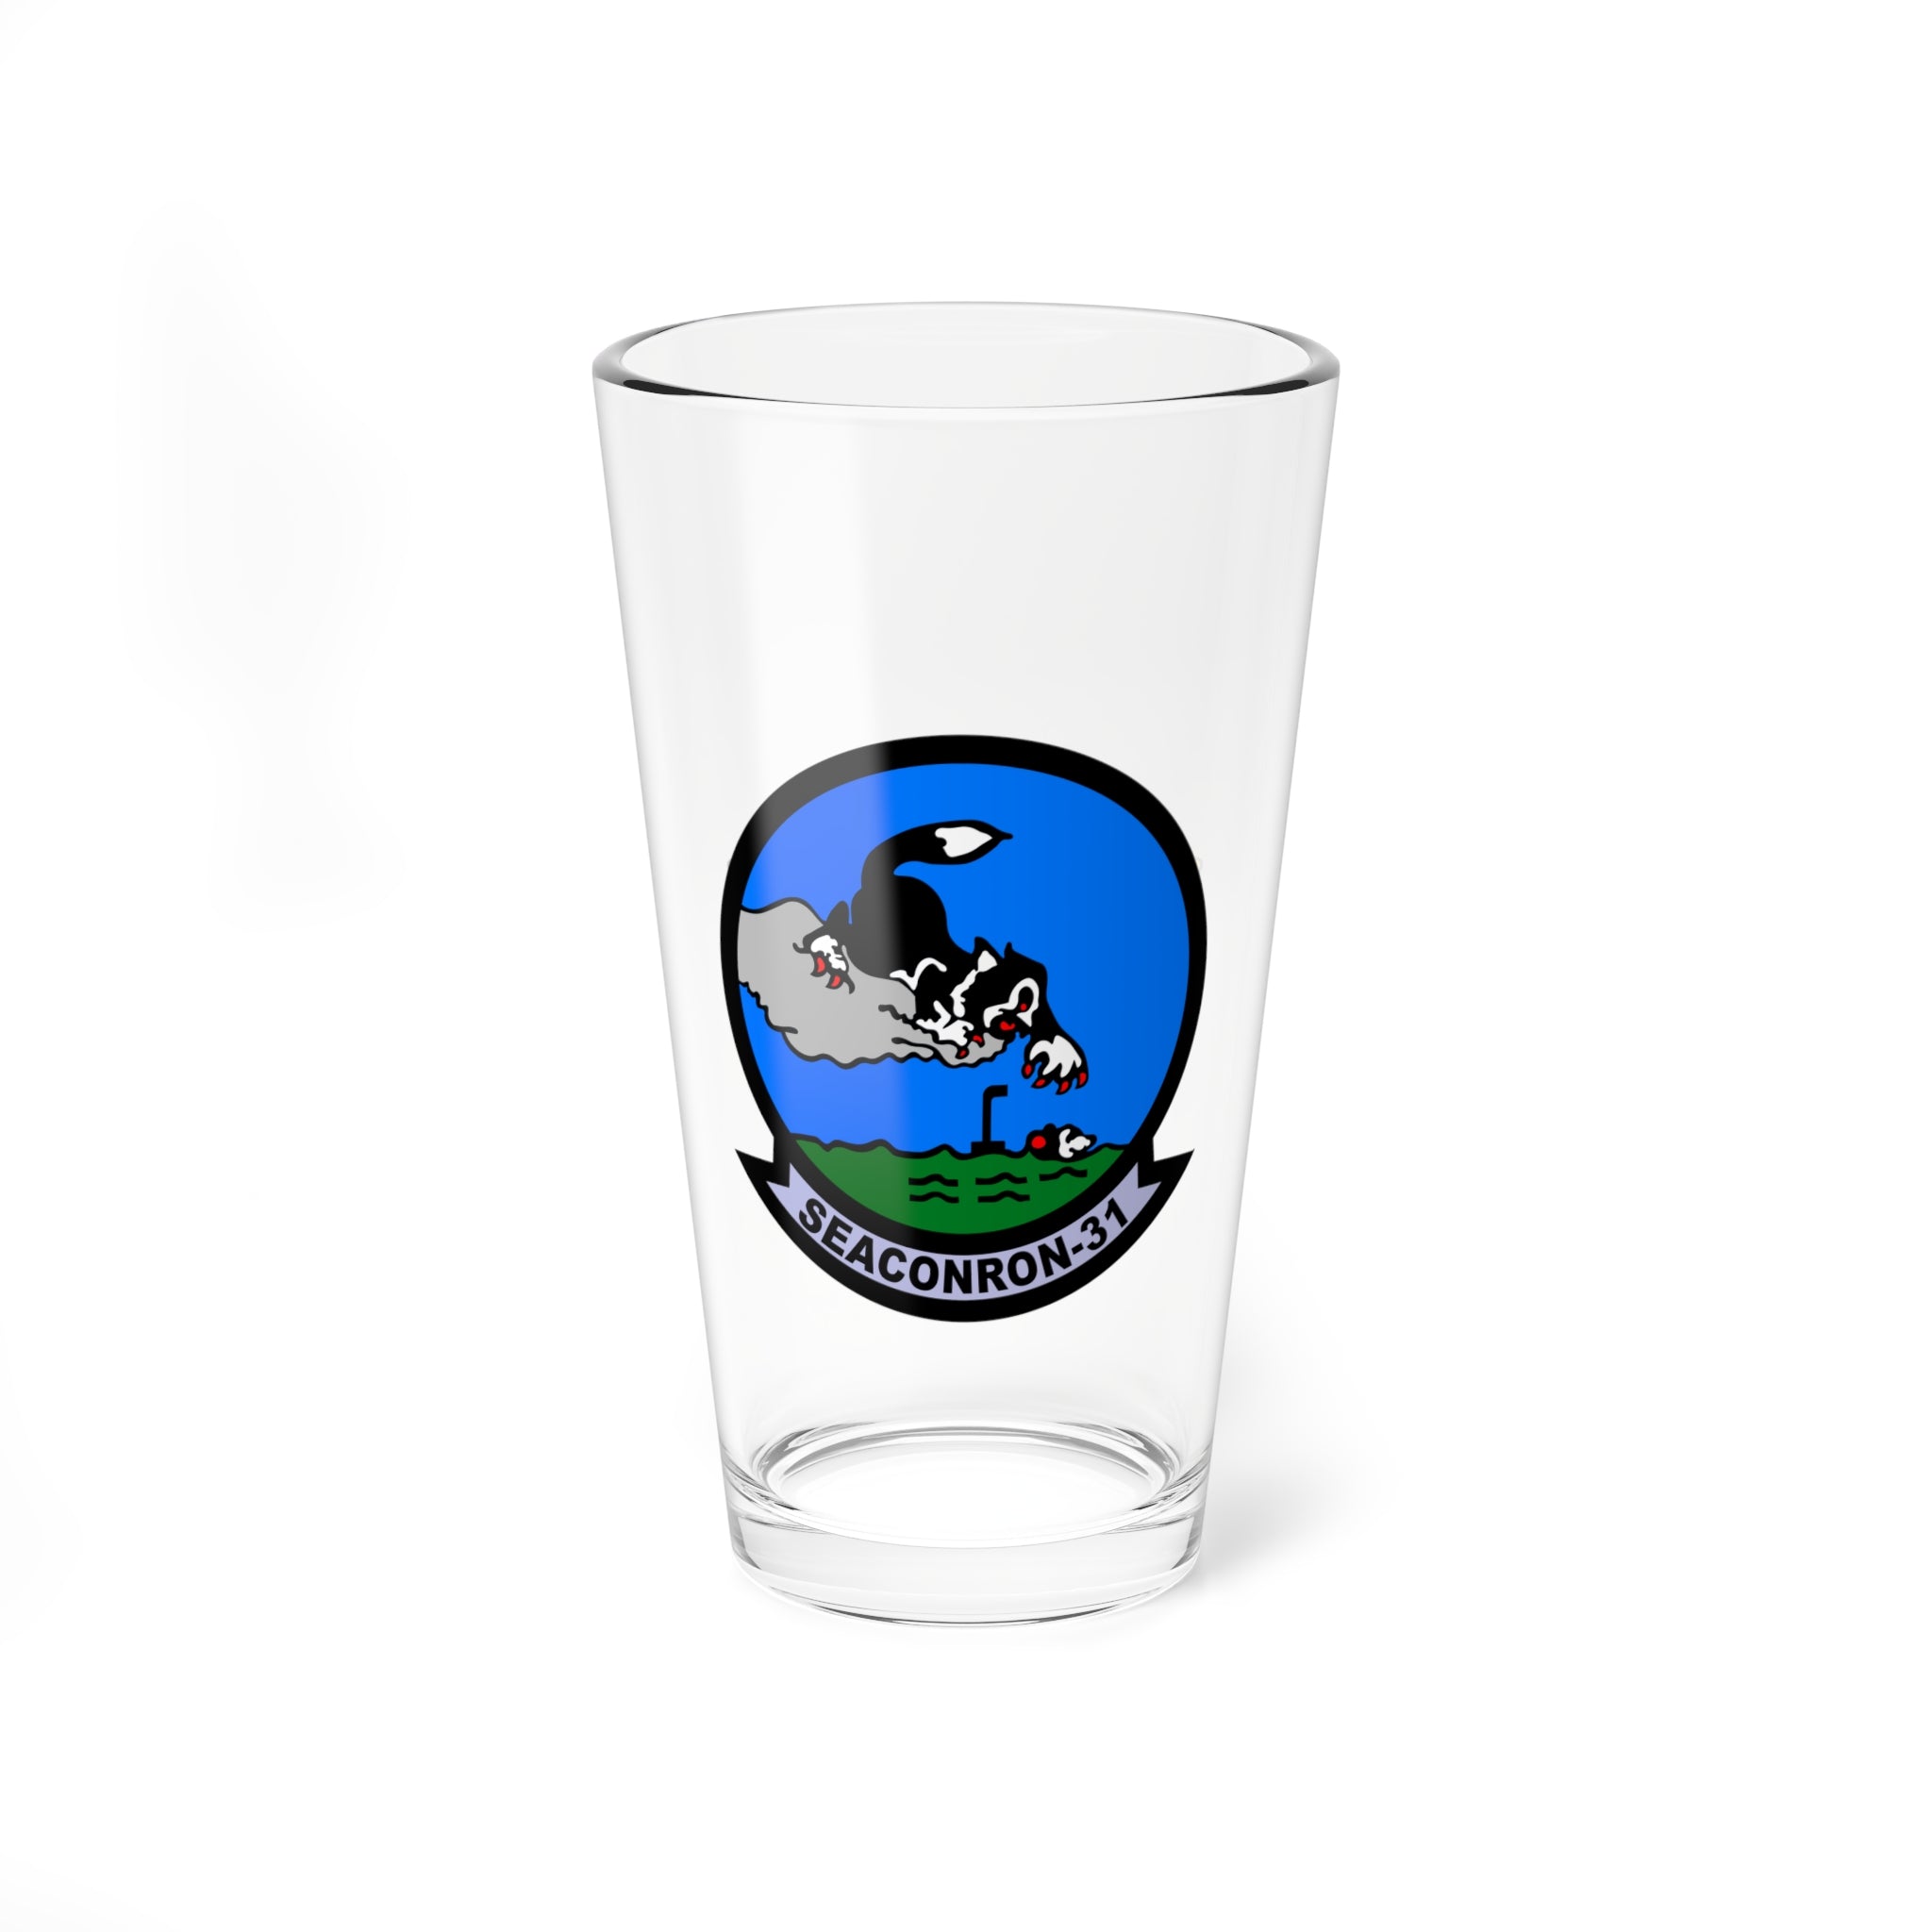 VS-31 "Topcats" Aircrewman Pint Glass US Navy Sea Control Squadron flying the S_3 Viking for retired and veteran Sailors